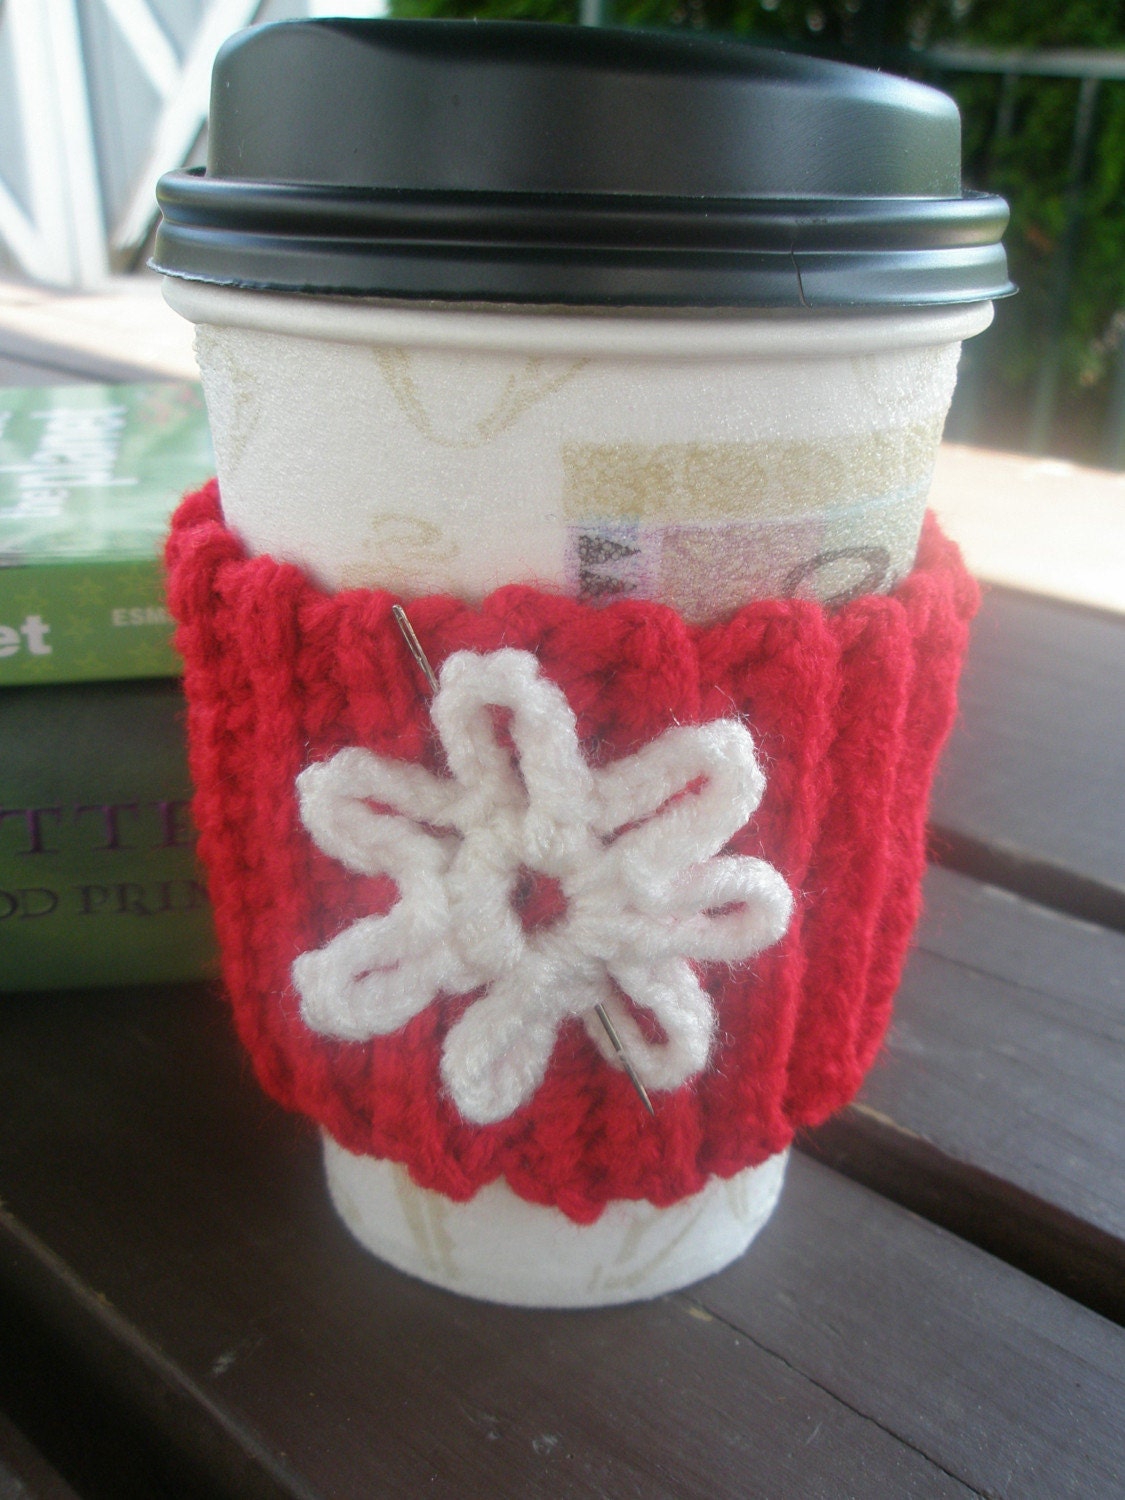 CIJ SALE  Crocheted Coffee Cozy in Cherry Red with white flower